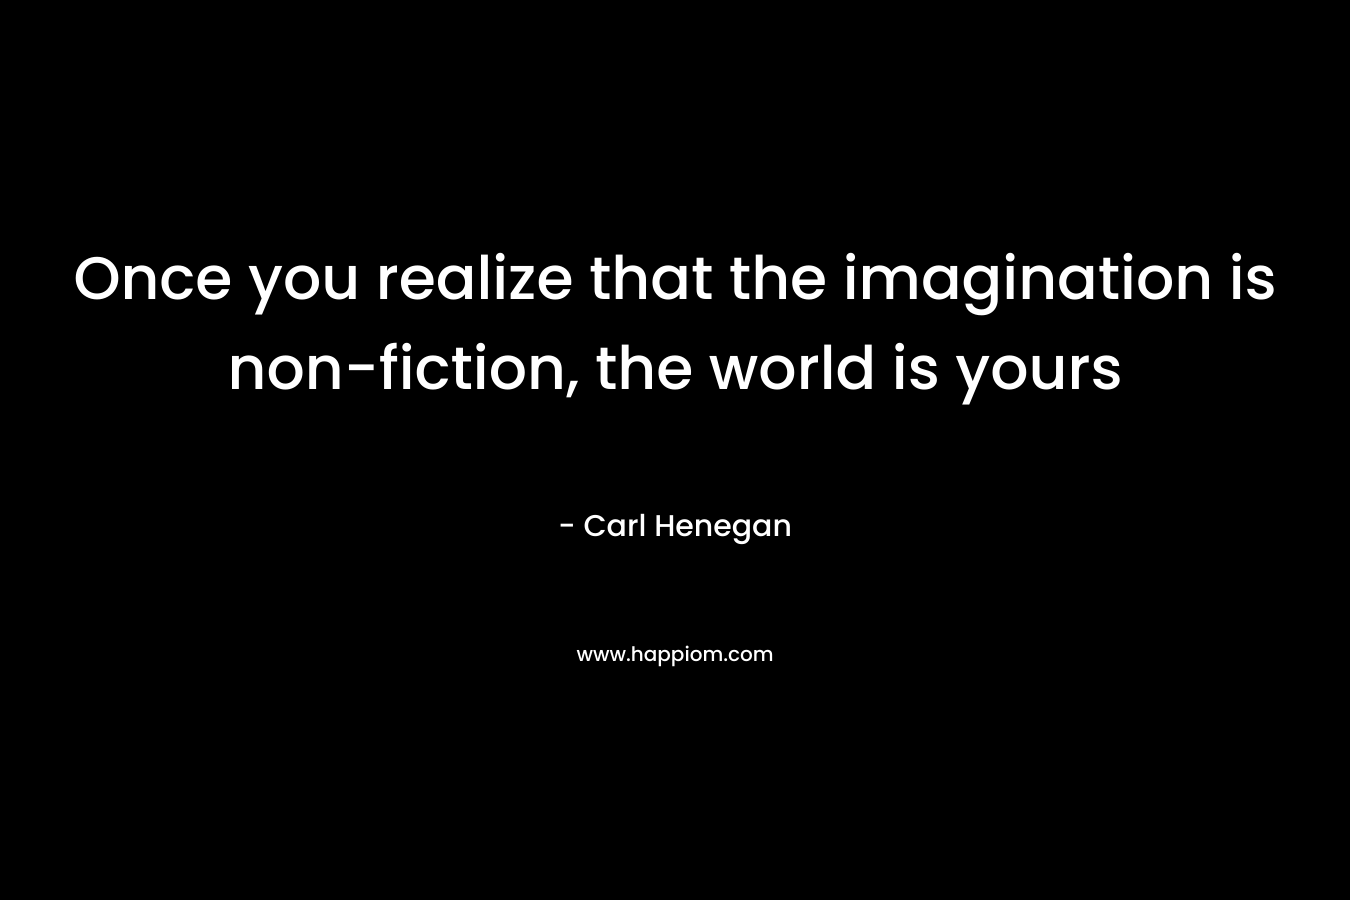 Once you realize that the imagination is non-fiction, the world is yours – Carl Henegan